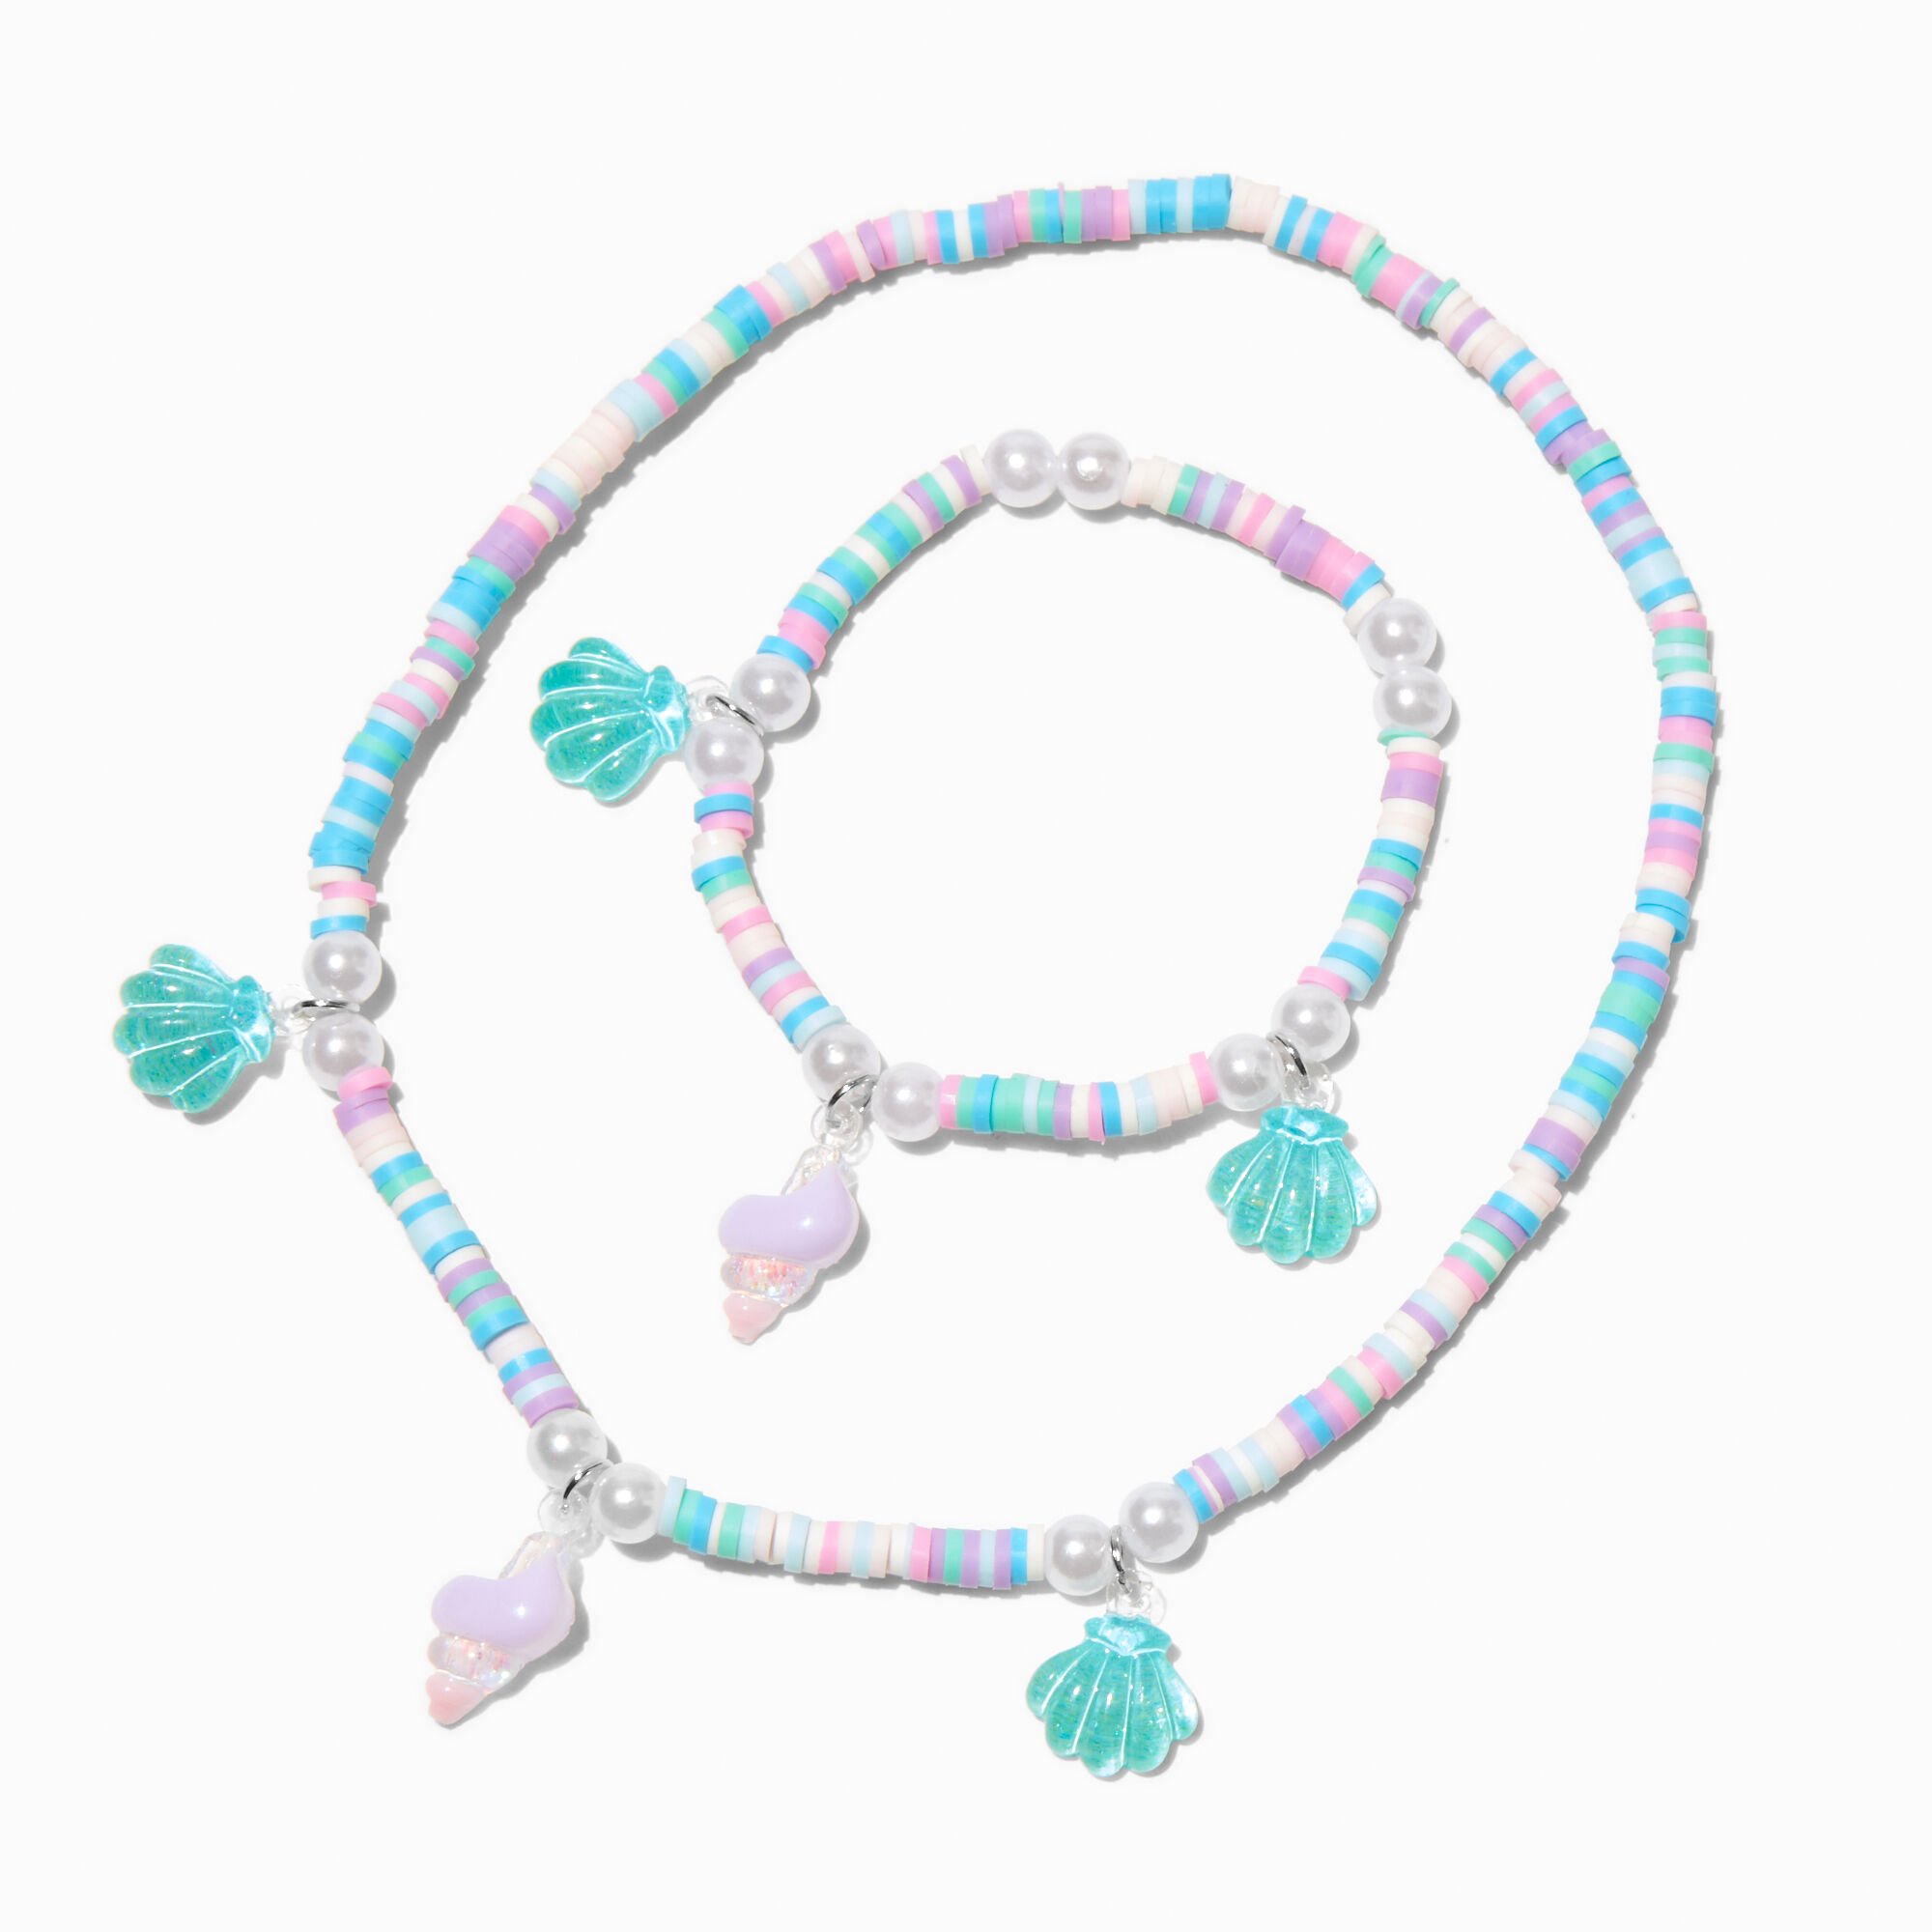 View Claires Club Mermaid Disc Beaded Jewelry Set 2 Pack information